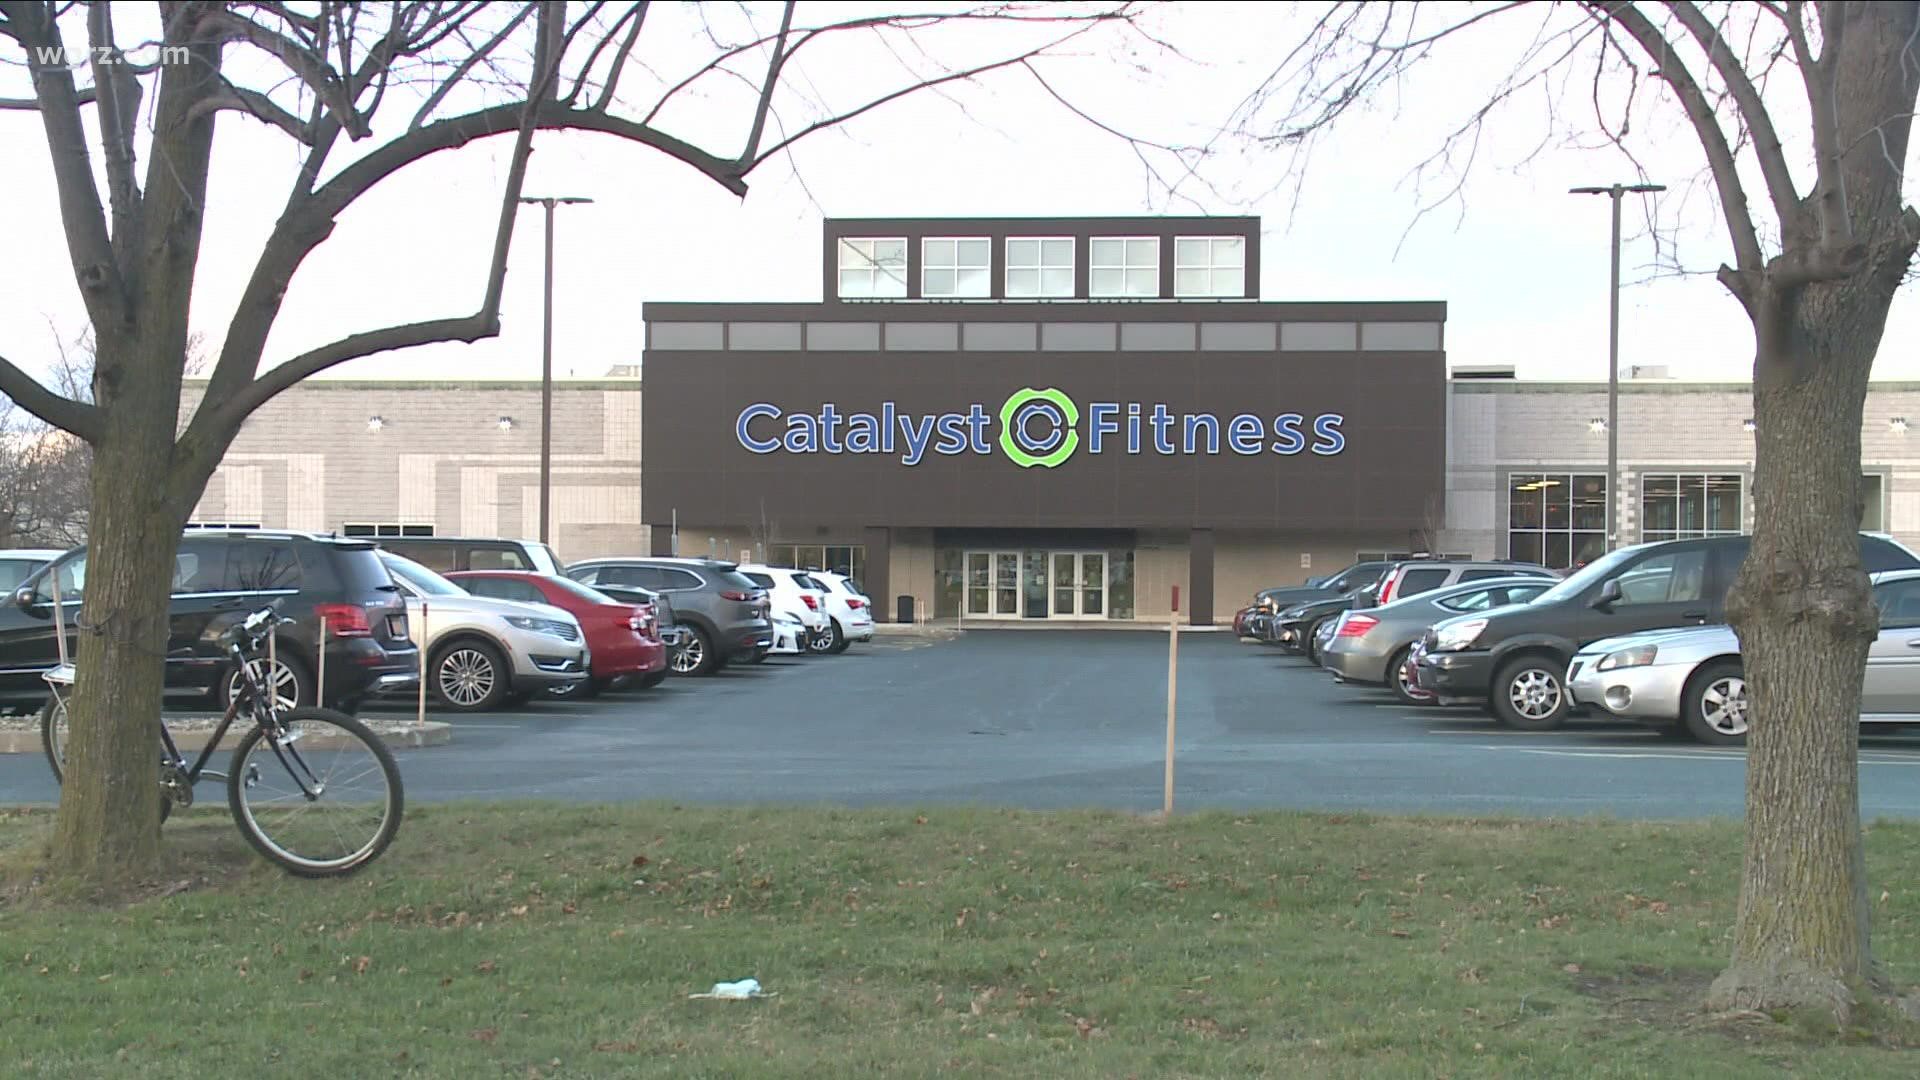 Small businesses throughout WNY have been resilient throughout this pandemic. With the Erie County mask mandate back some gym owners are following a recent trend.